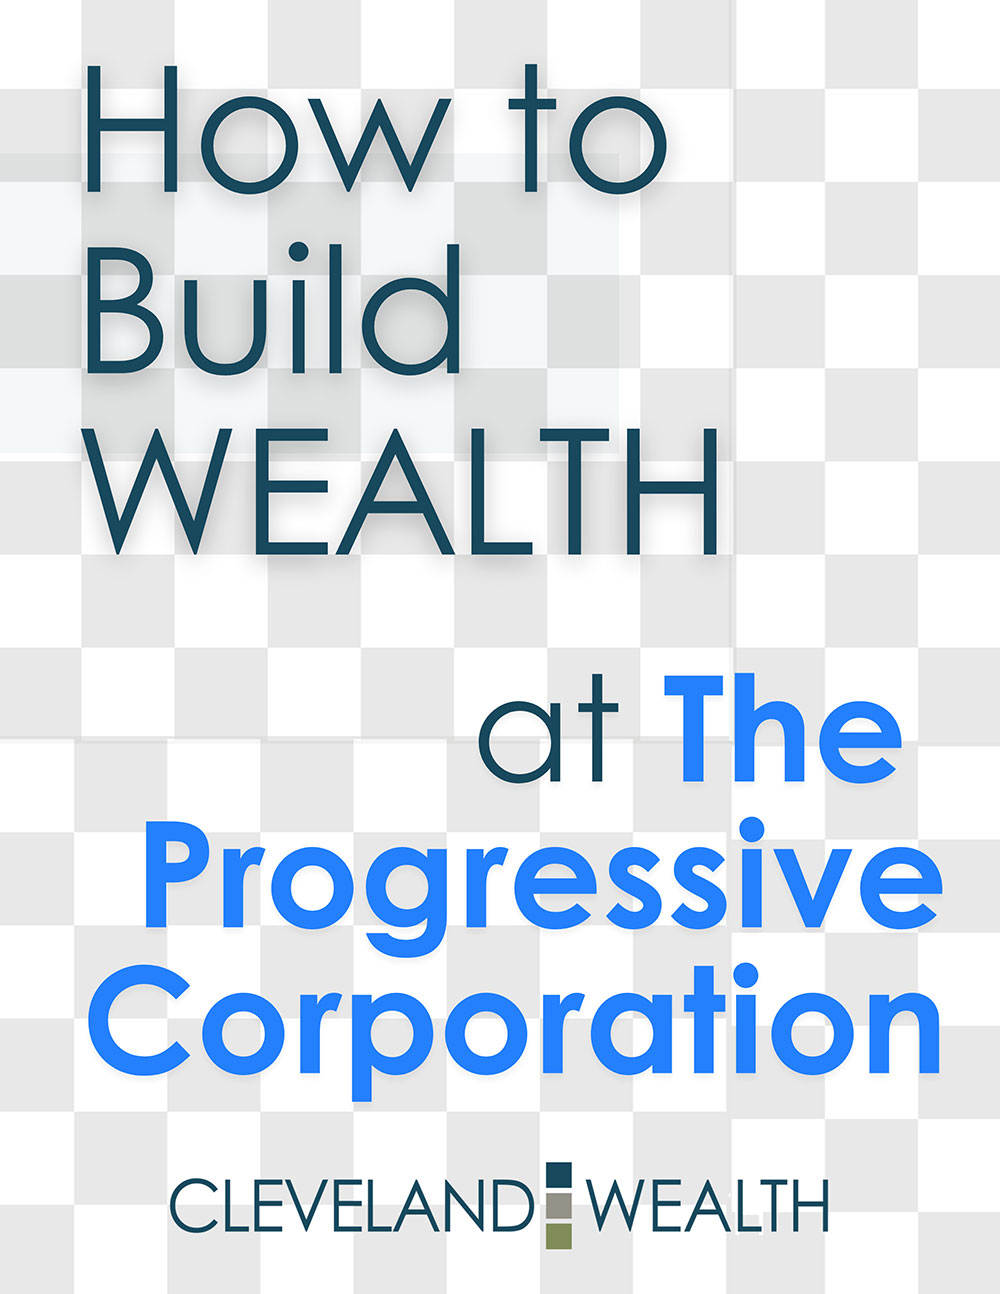 How to Build Wealth at Progressive Corporation | A Cleveland Wealth Whitepaper